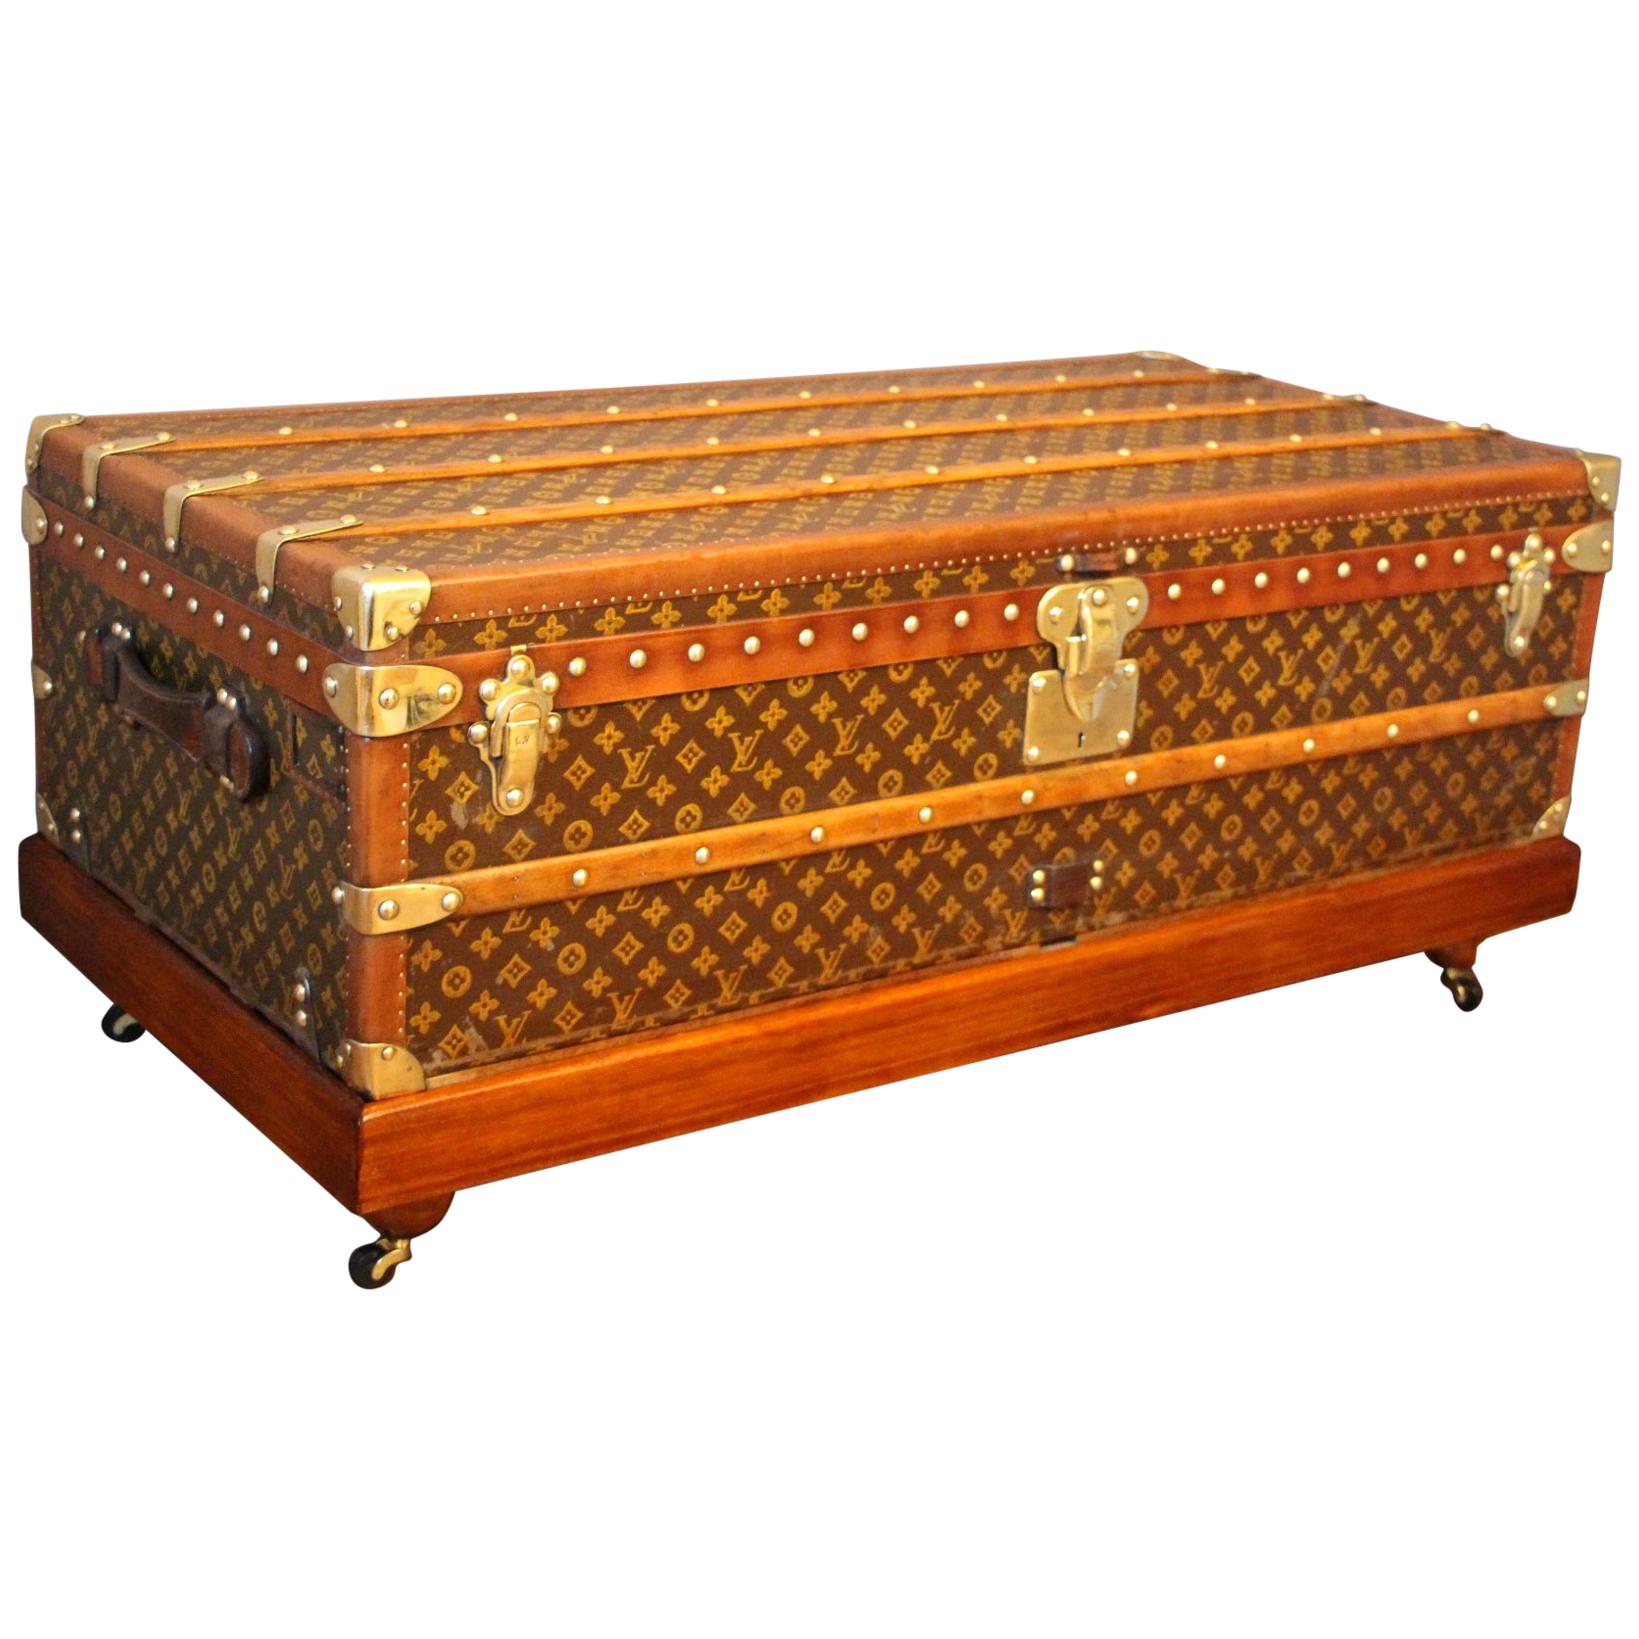 This beautiful Louis Vuitton trunk features stenciled hand painted monogram canvas and honey color lozine trim.
All solid brass LV stamped studs and locks as well as solid brass corners.
Leather handles on each side.
Its interior is all original